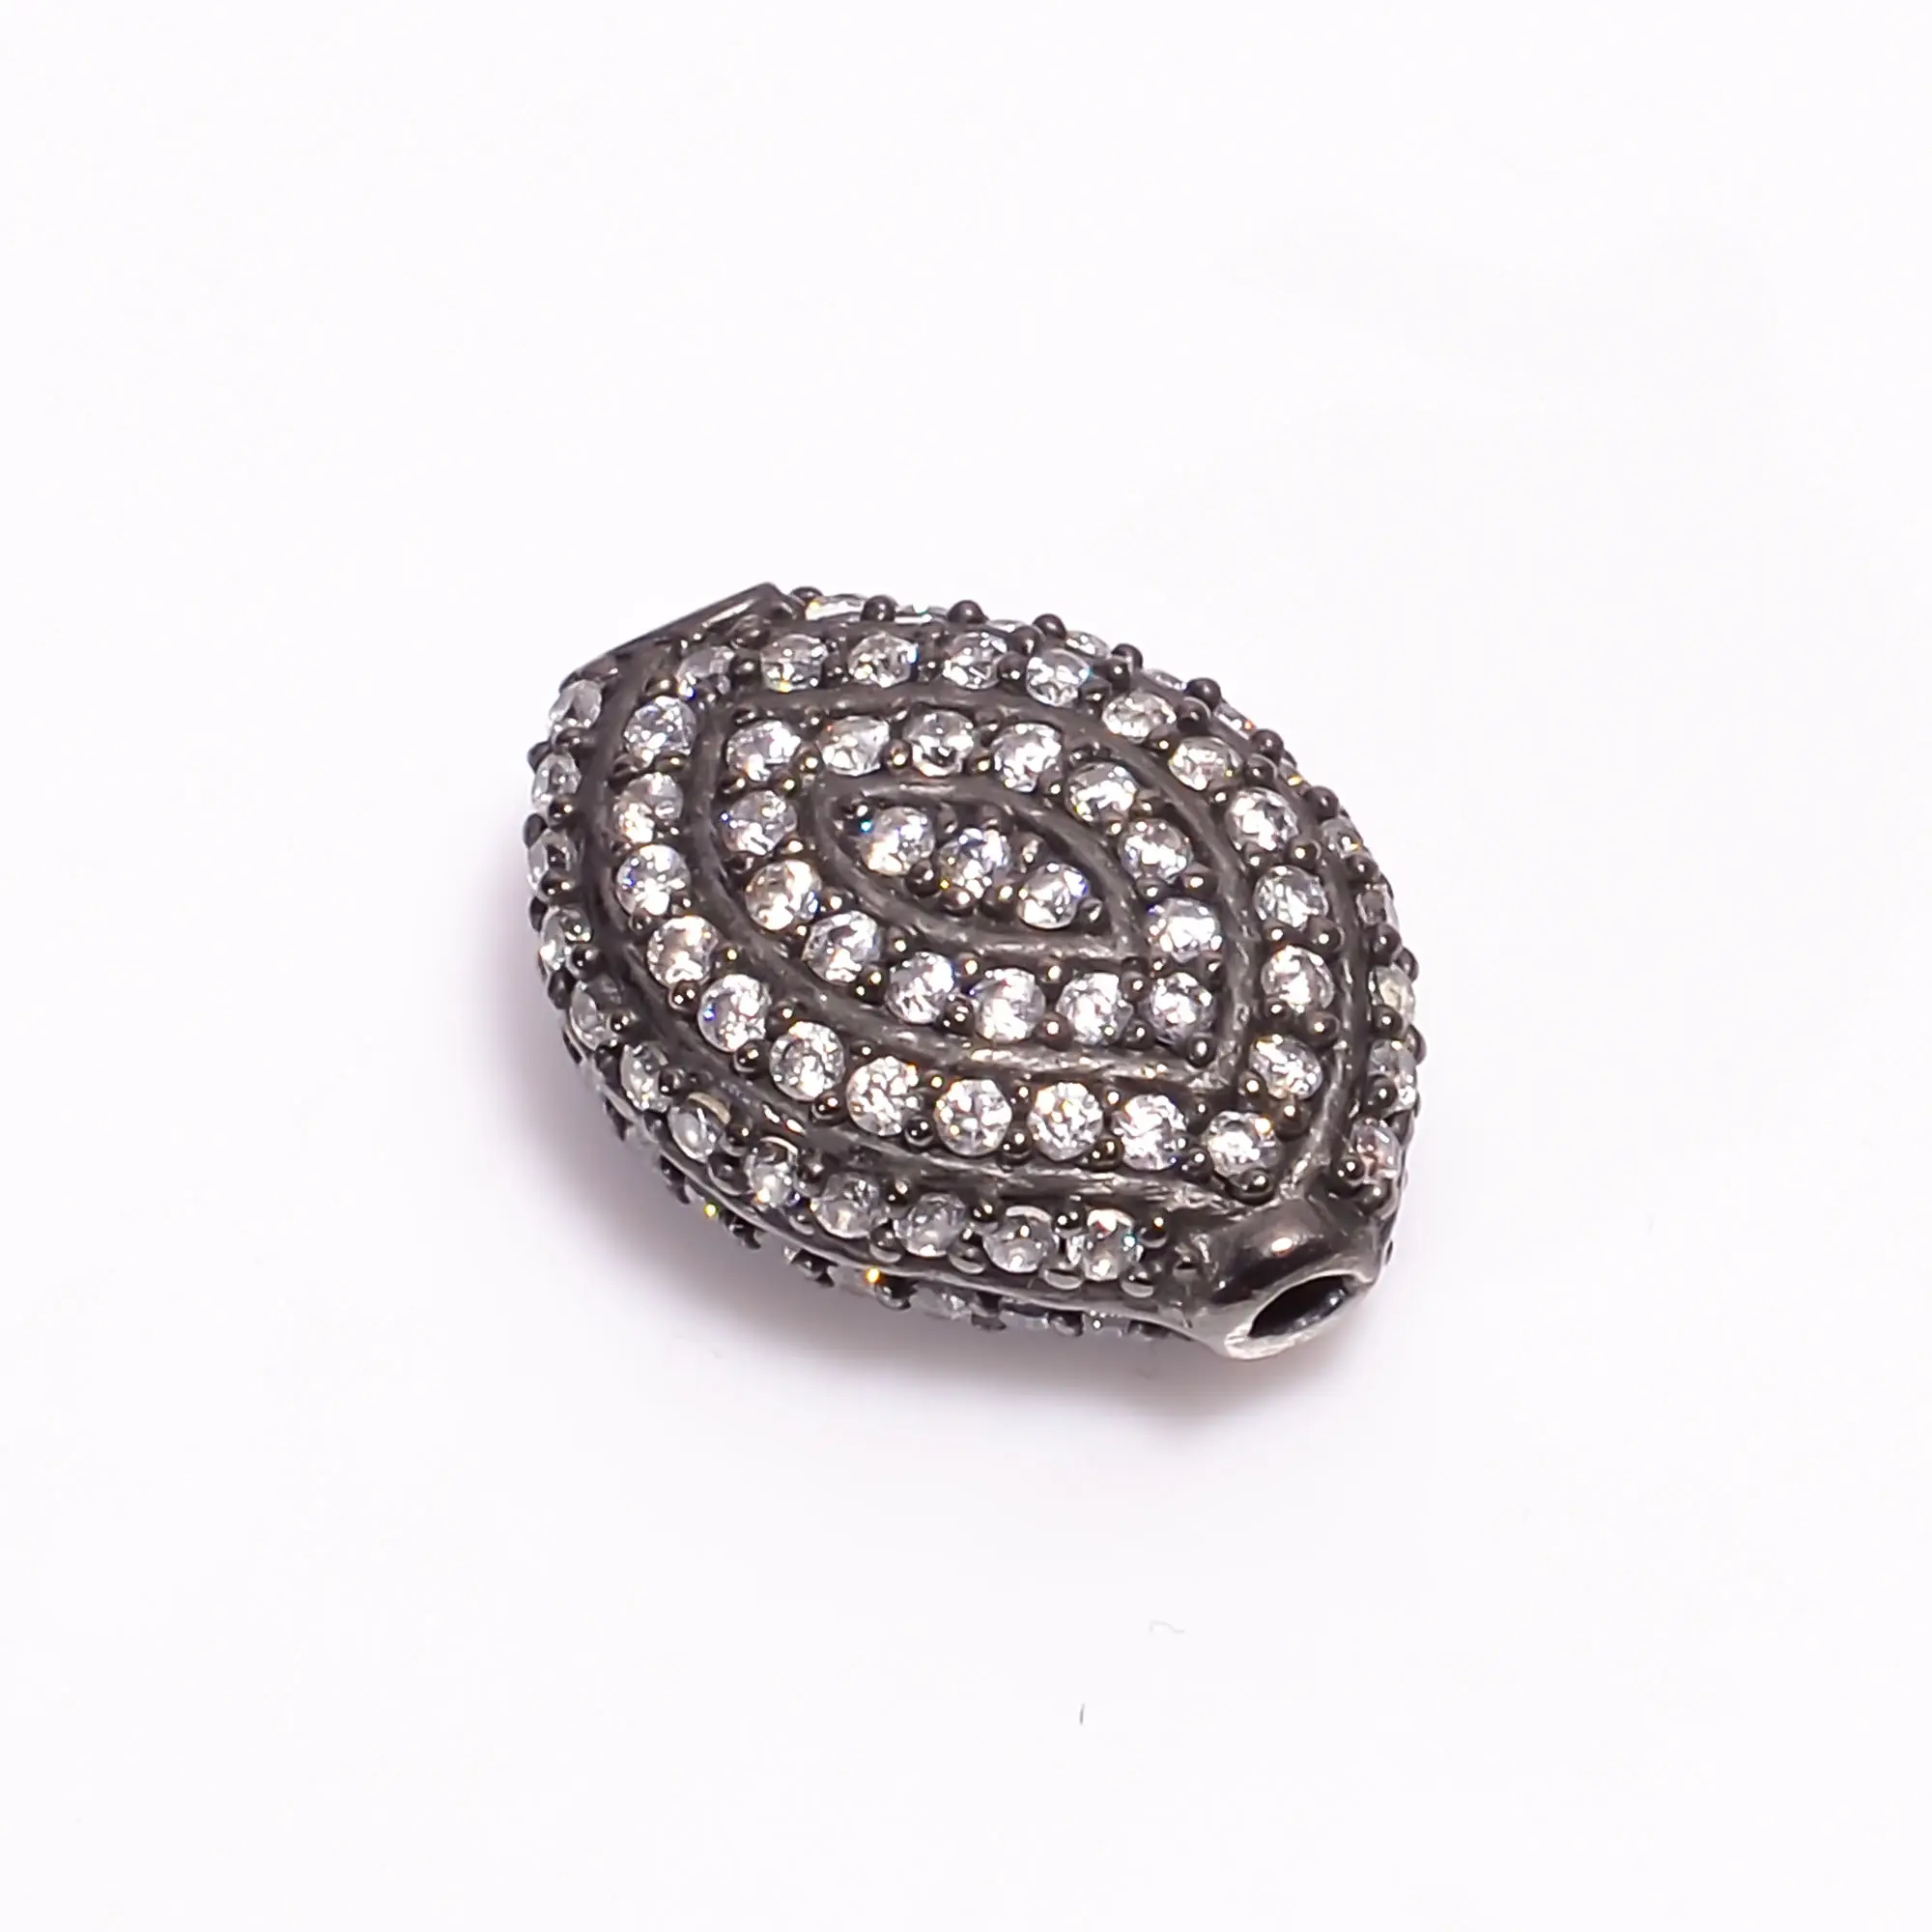 Micro Pave Zircon Beads Spacer Pendants Charms Findings Components For Jewelry Making 925 Sterling Silver Pave Beads Jewelry 4